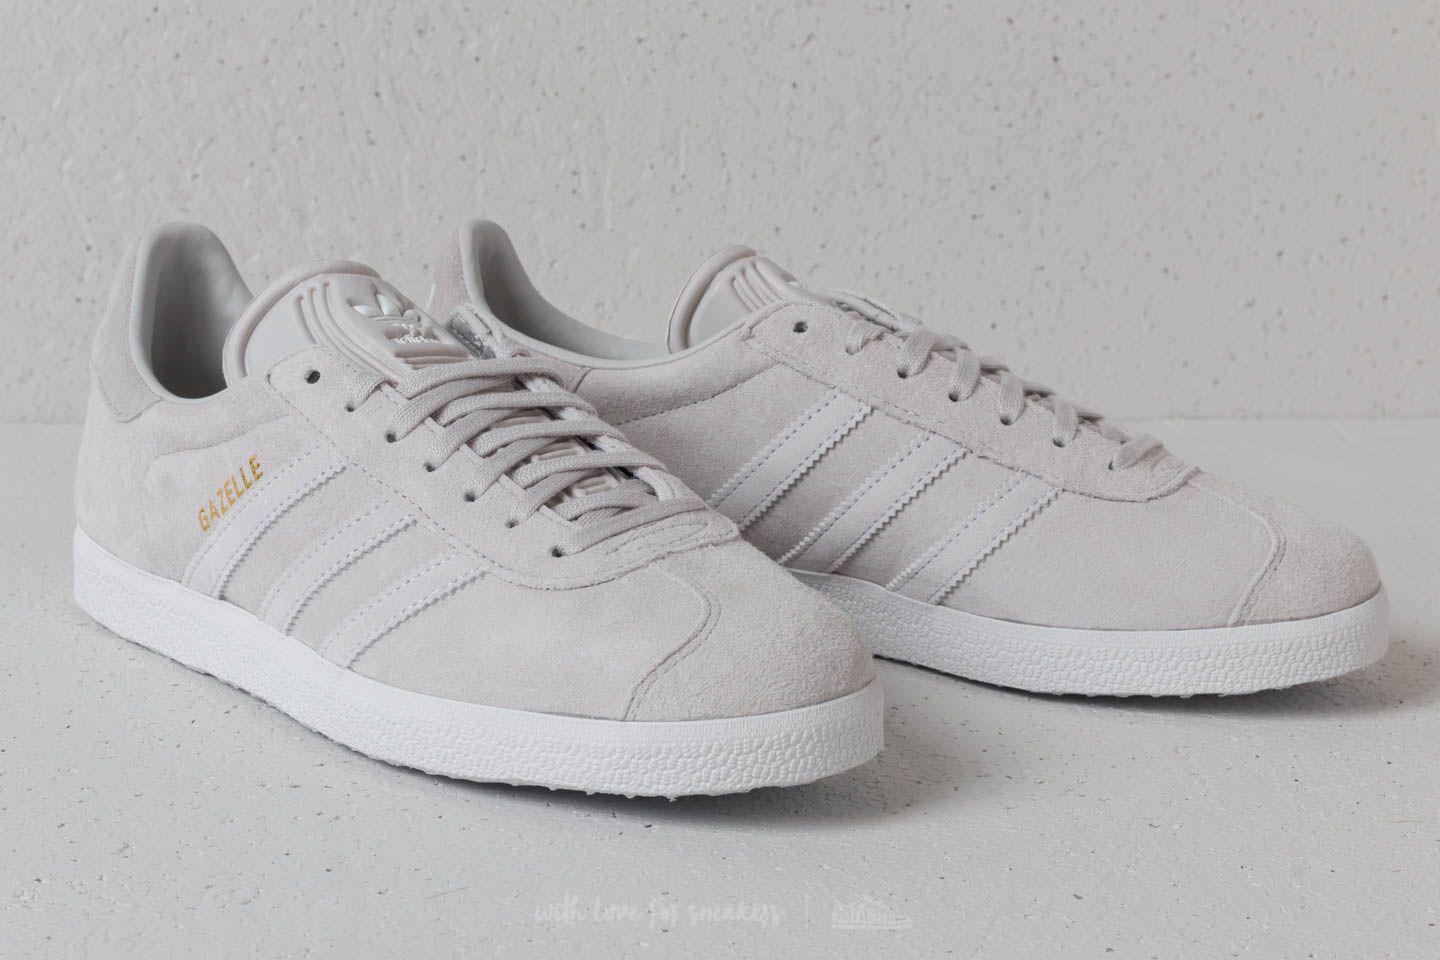 adidas gazelle trainers grey two icey pink cream white exclusive